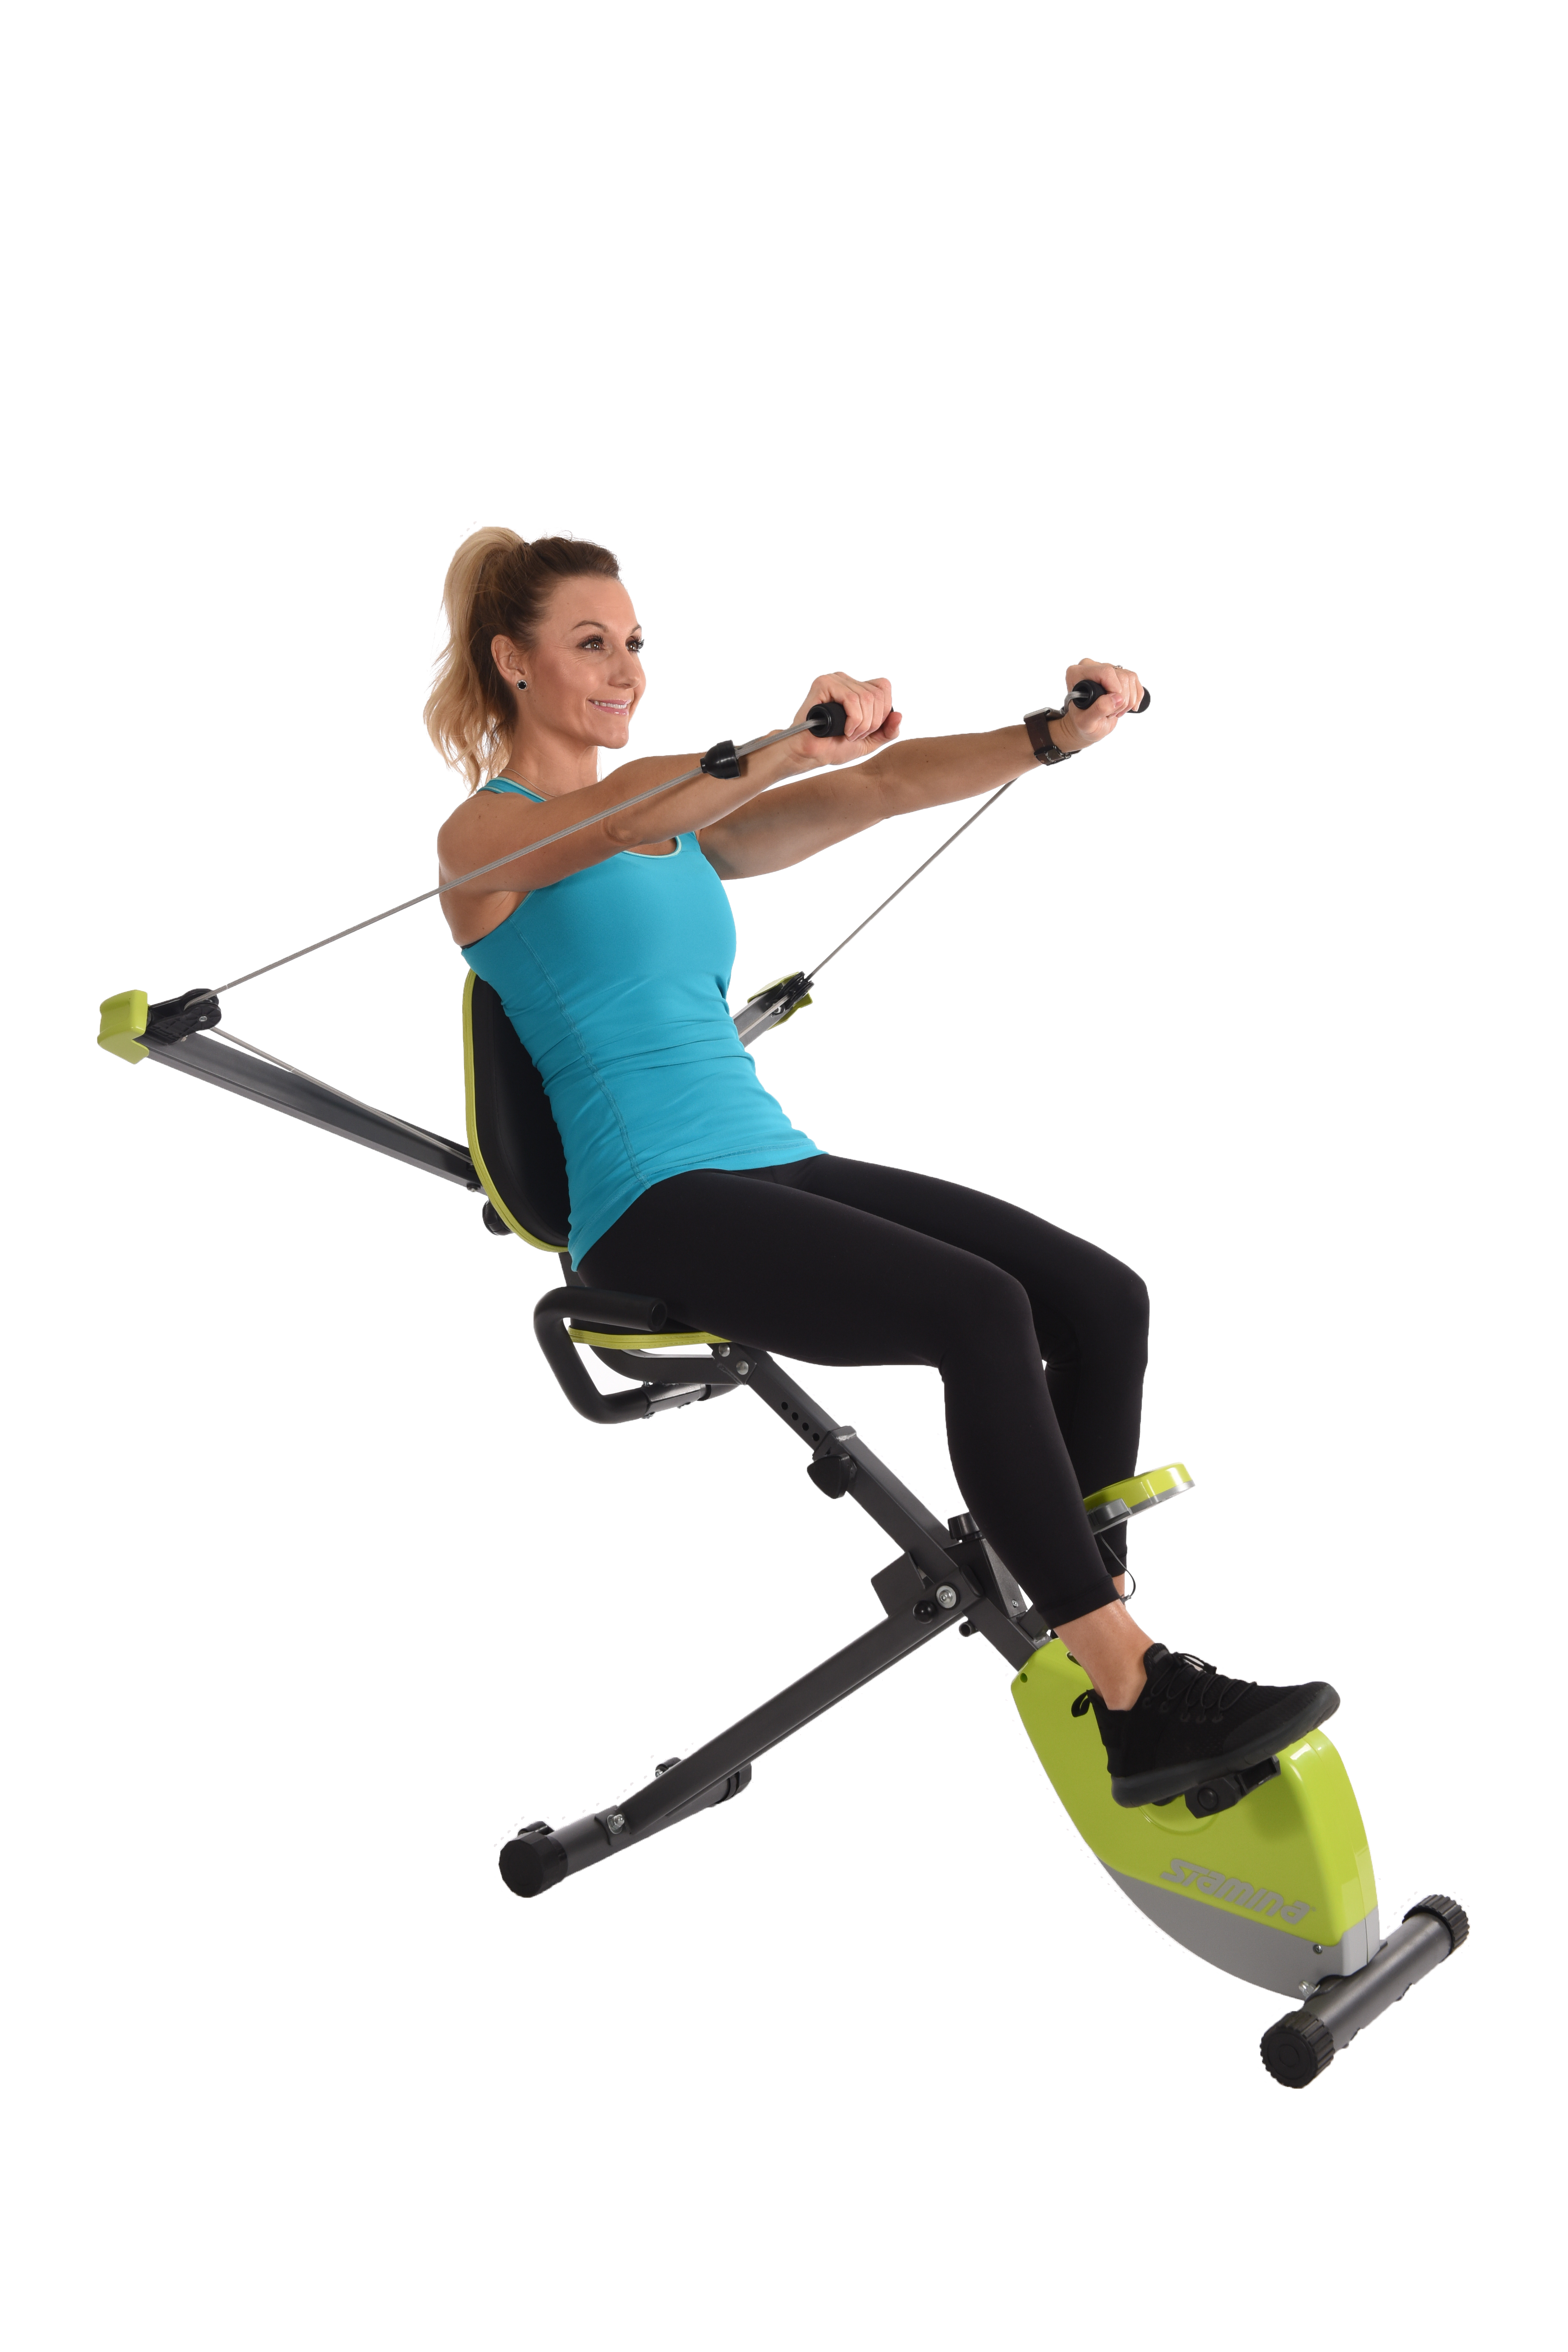 Performing chest press on Stamina Wonder Exercise Bike With Strength System.